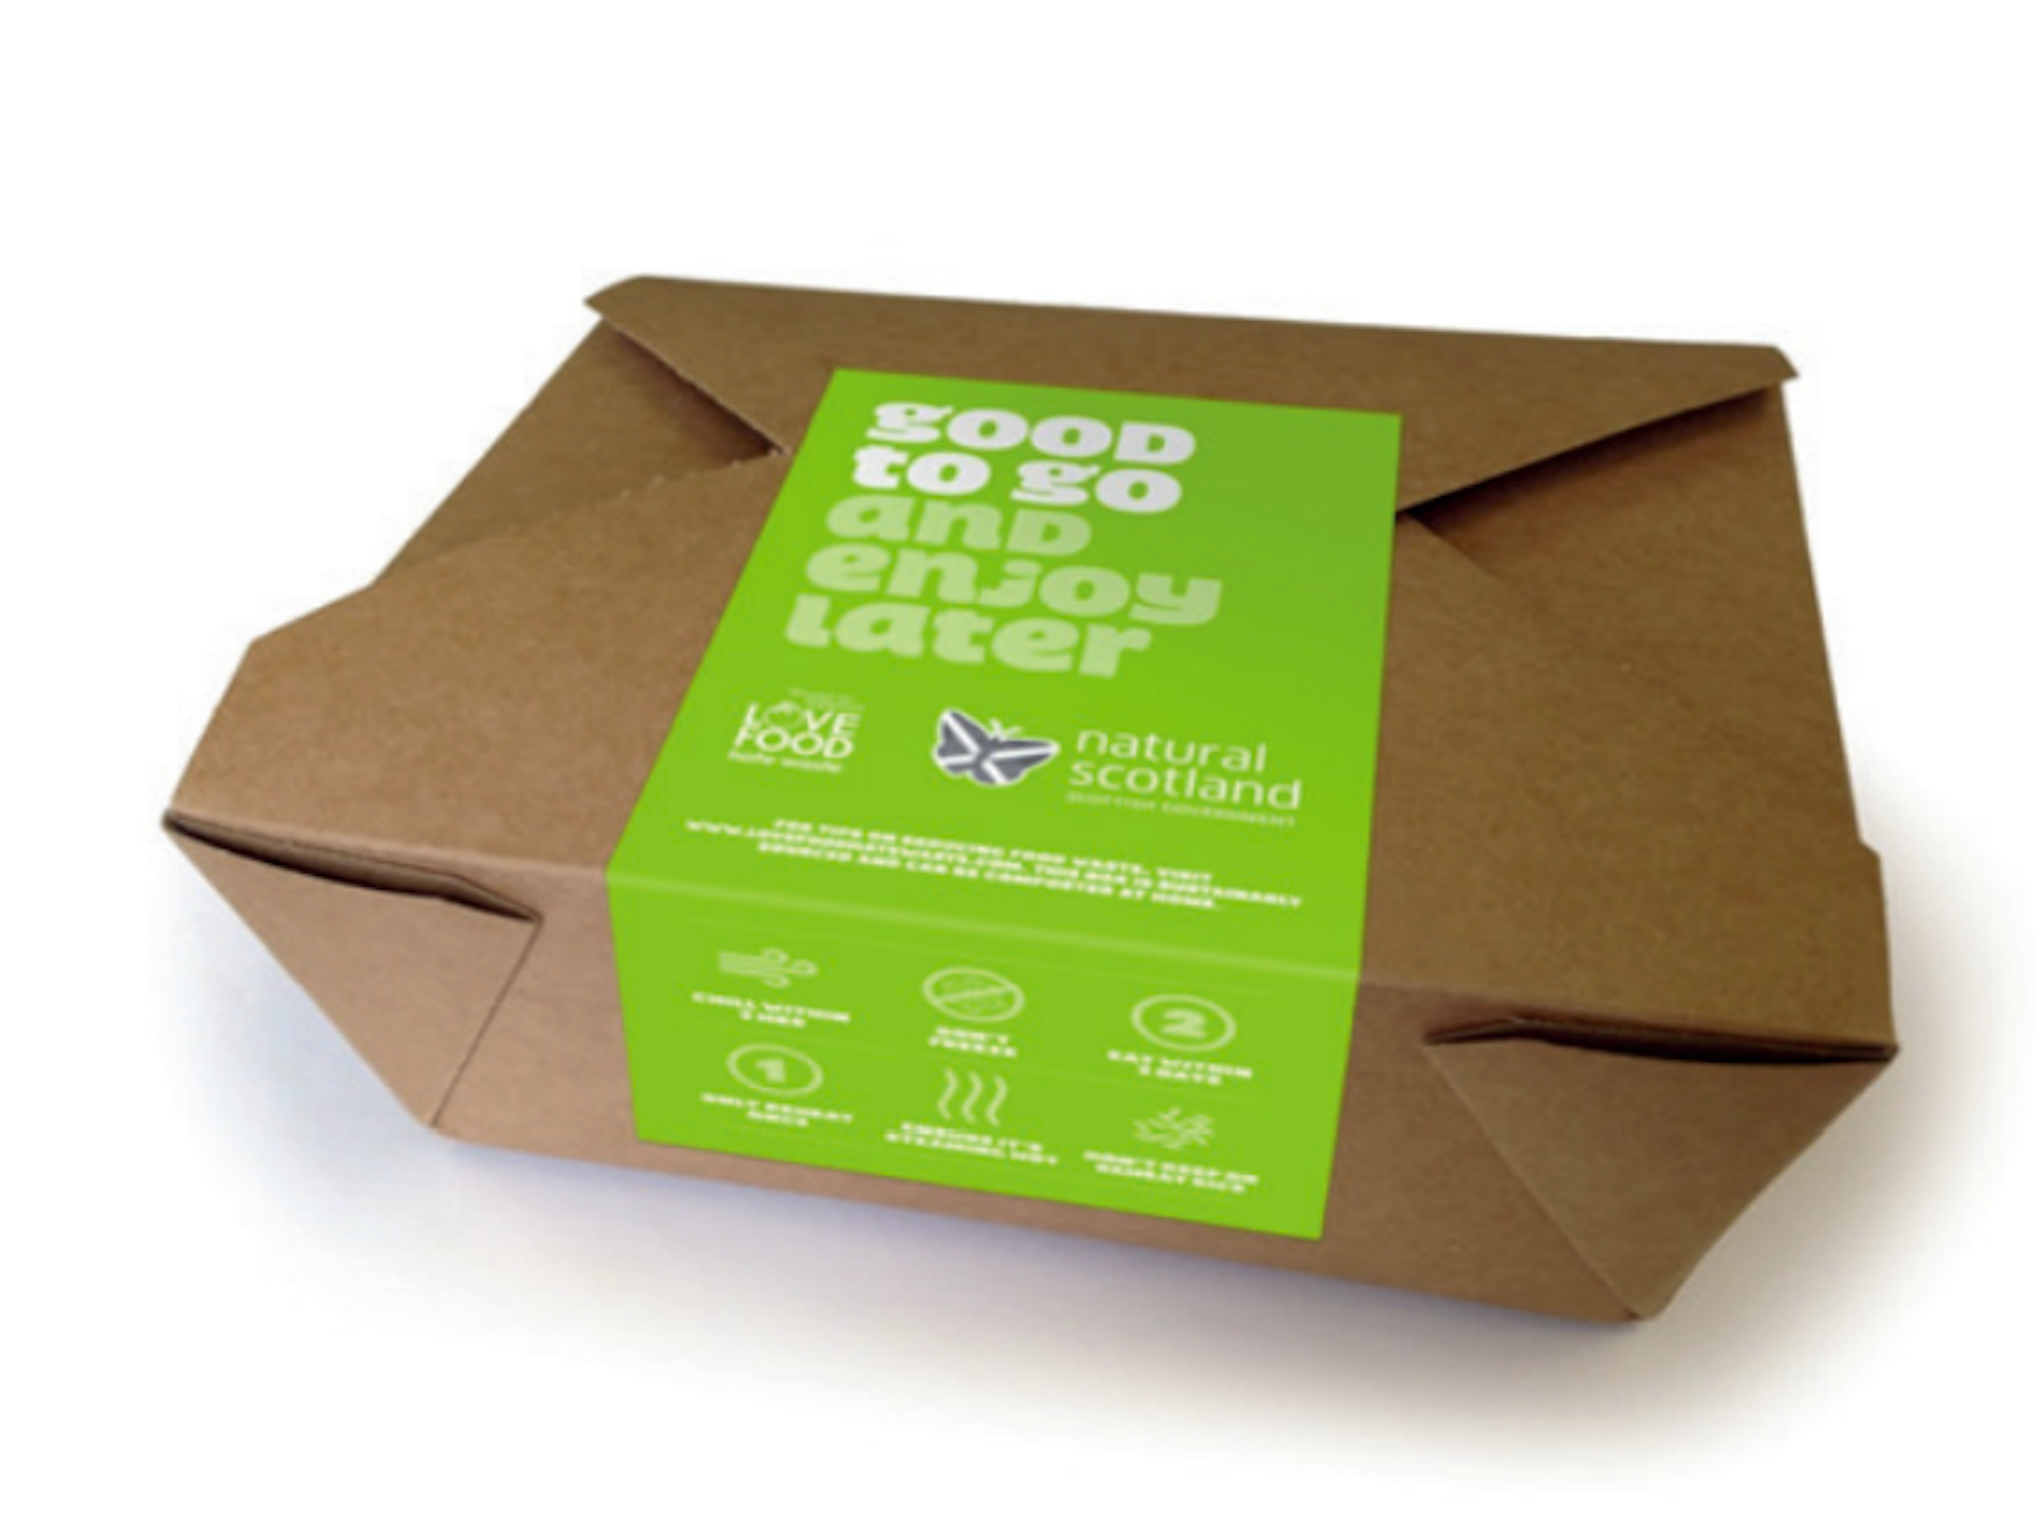 Good to Go introduced specially branded doggy bags to a selection of restaurants in Scotland, and delivered staff training and promotional materials to actively encourage diners to take home their leftovers.